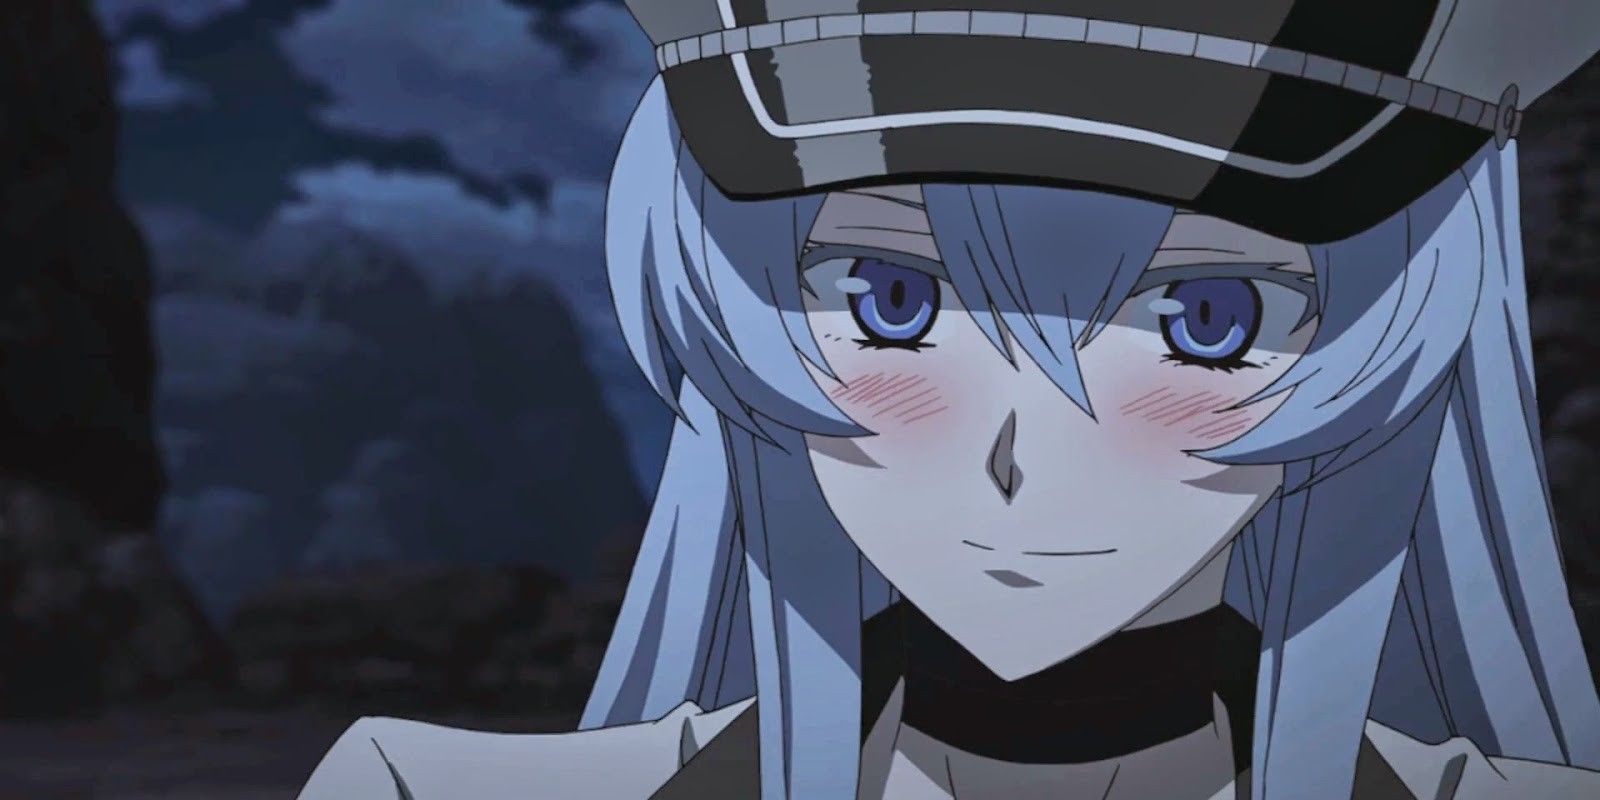 Esdeath from Akame Ga Kill! smiling and blushing.